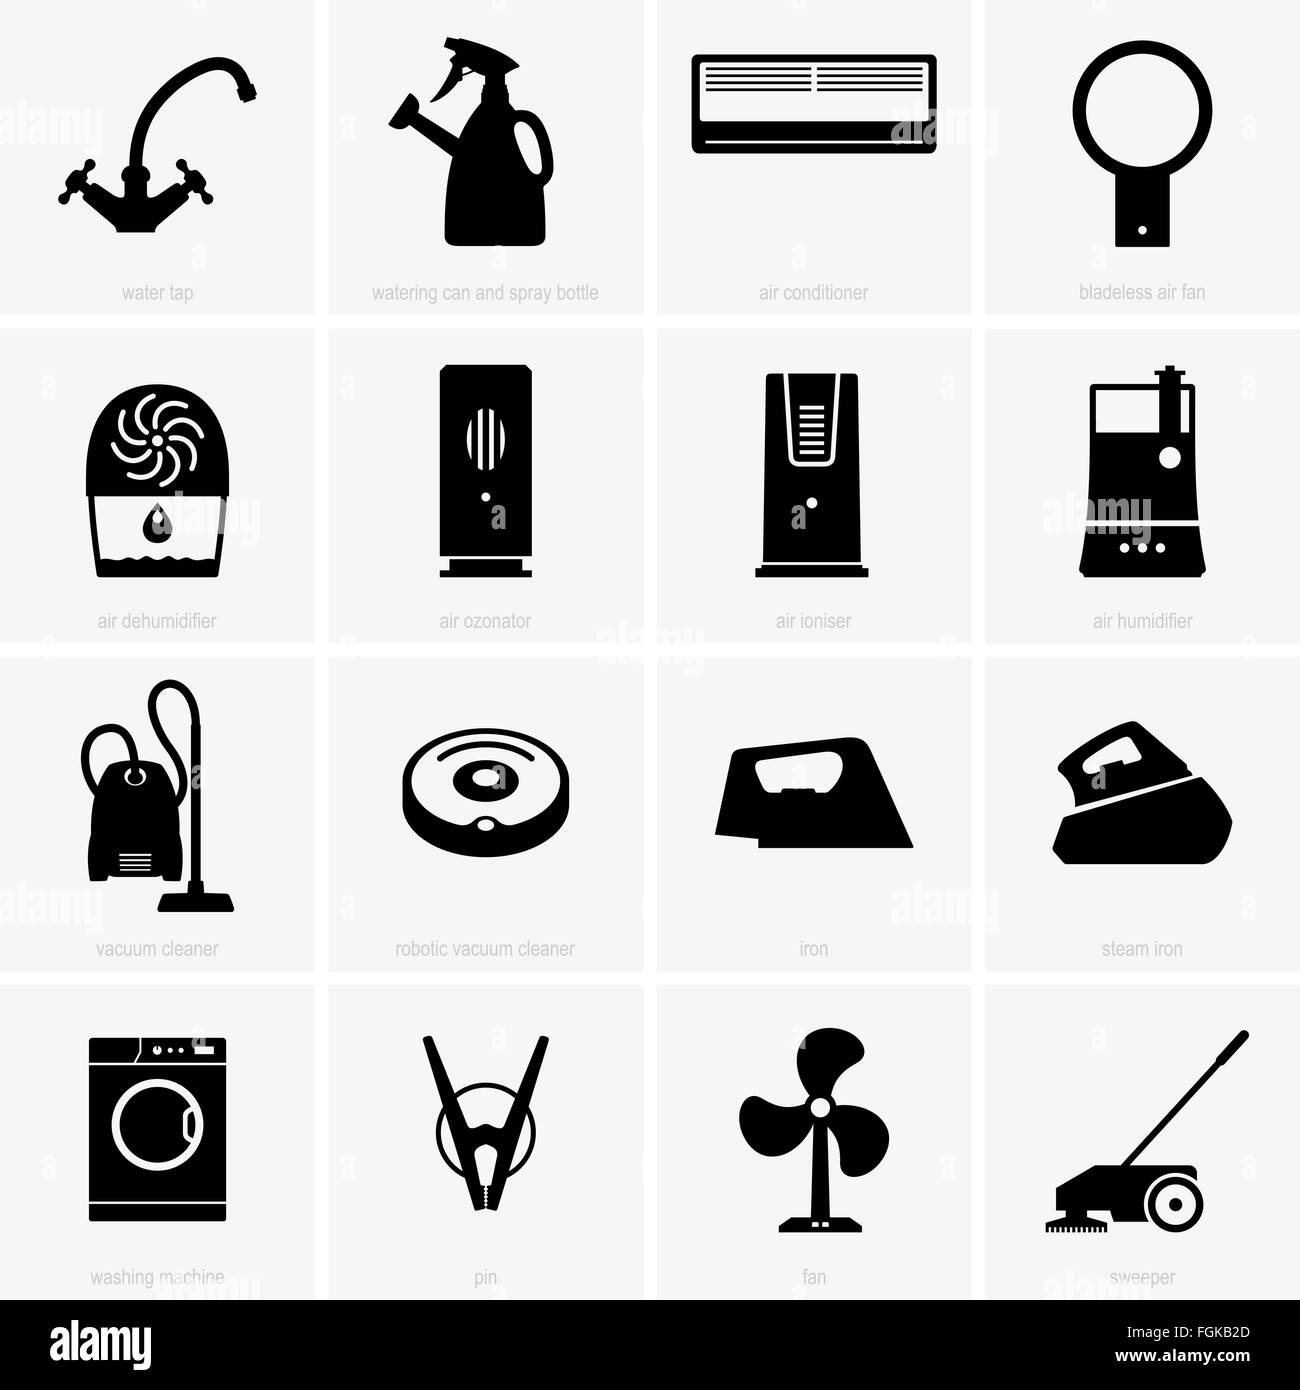 Climatic and cleaning appliances Stock Vector